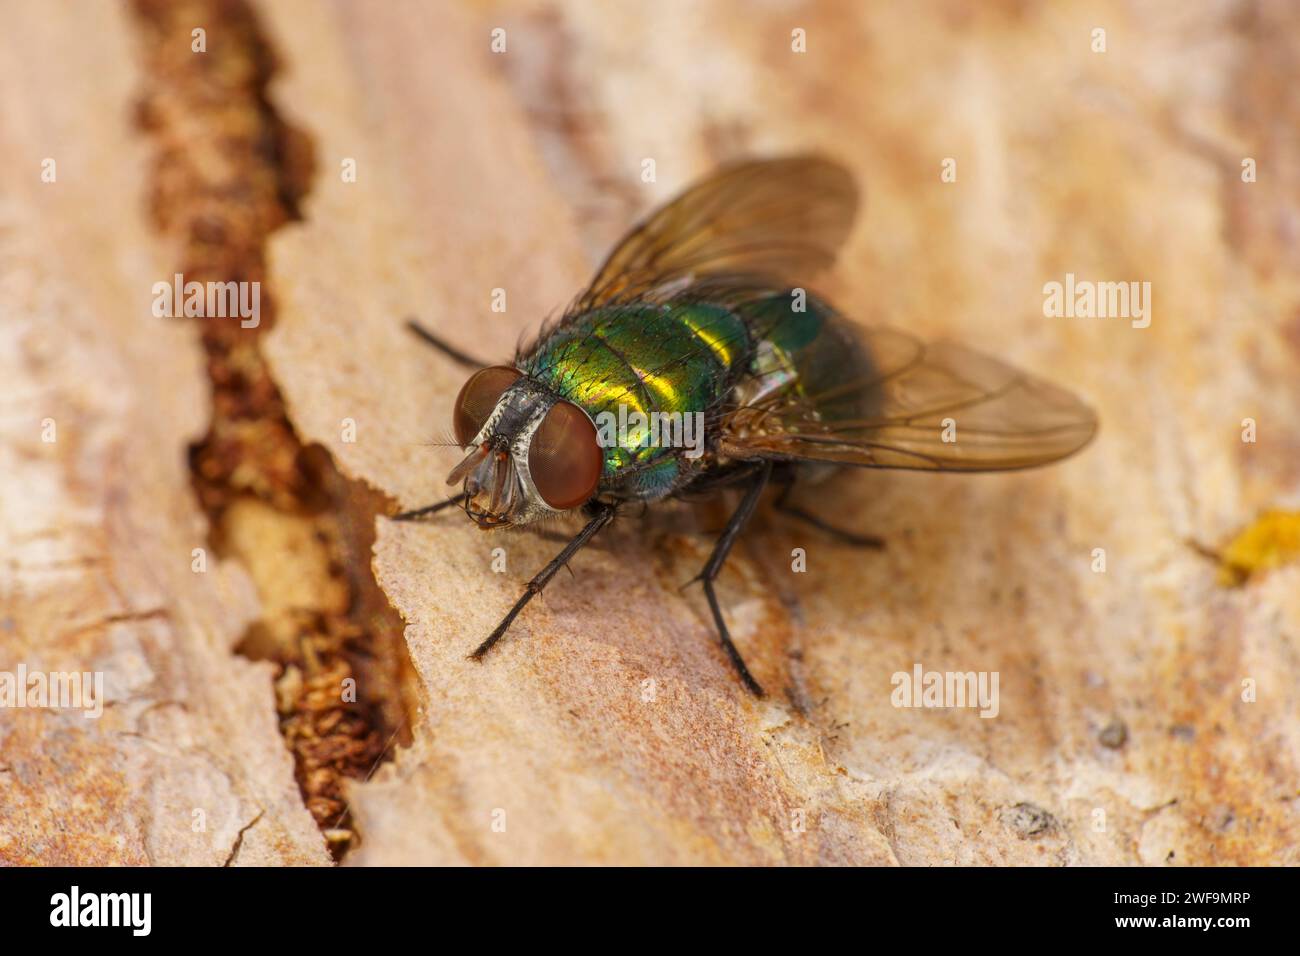 Lucilia sericata Common green bottle fly Sheep blow fly Family Calliphoridae Genus Lucilia fly wild nature insect wallpaper Stock Photo